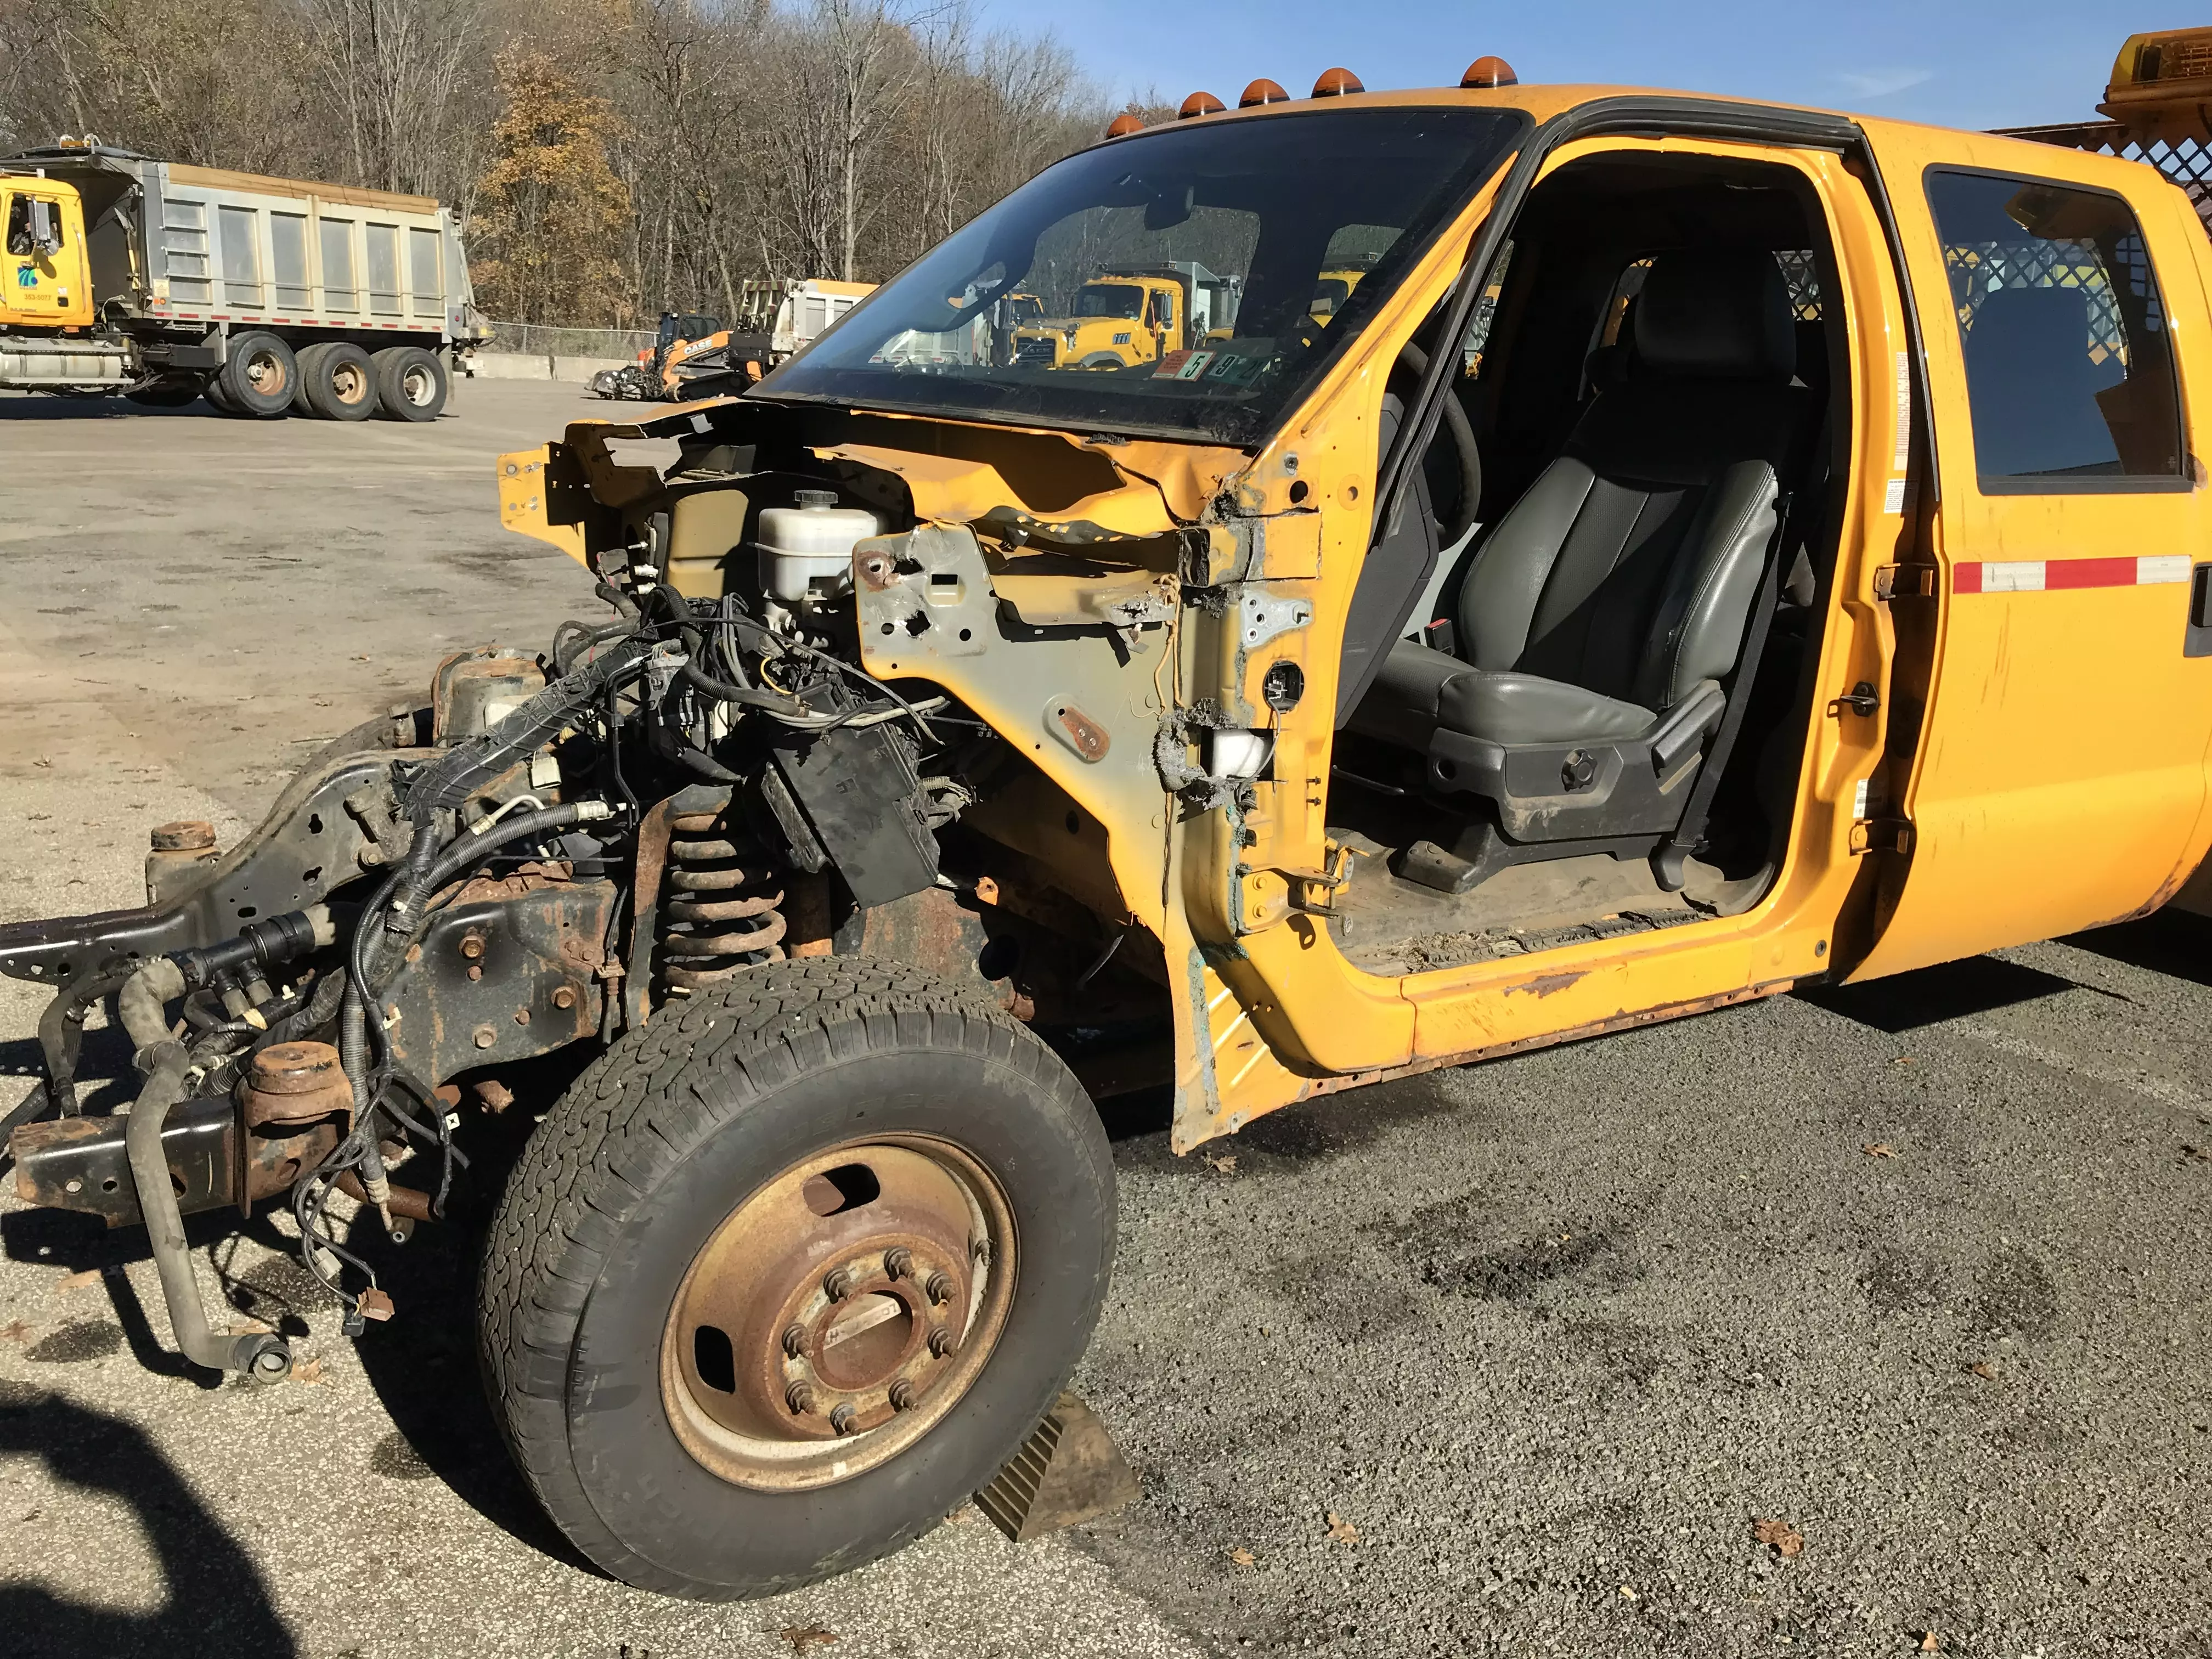 An image of a different yellow PennDOT crew cab pickup truck that has parts taken from it to be used for repairs of other PennDOT vehicles.